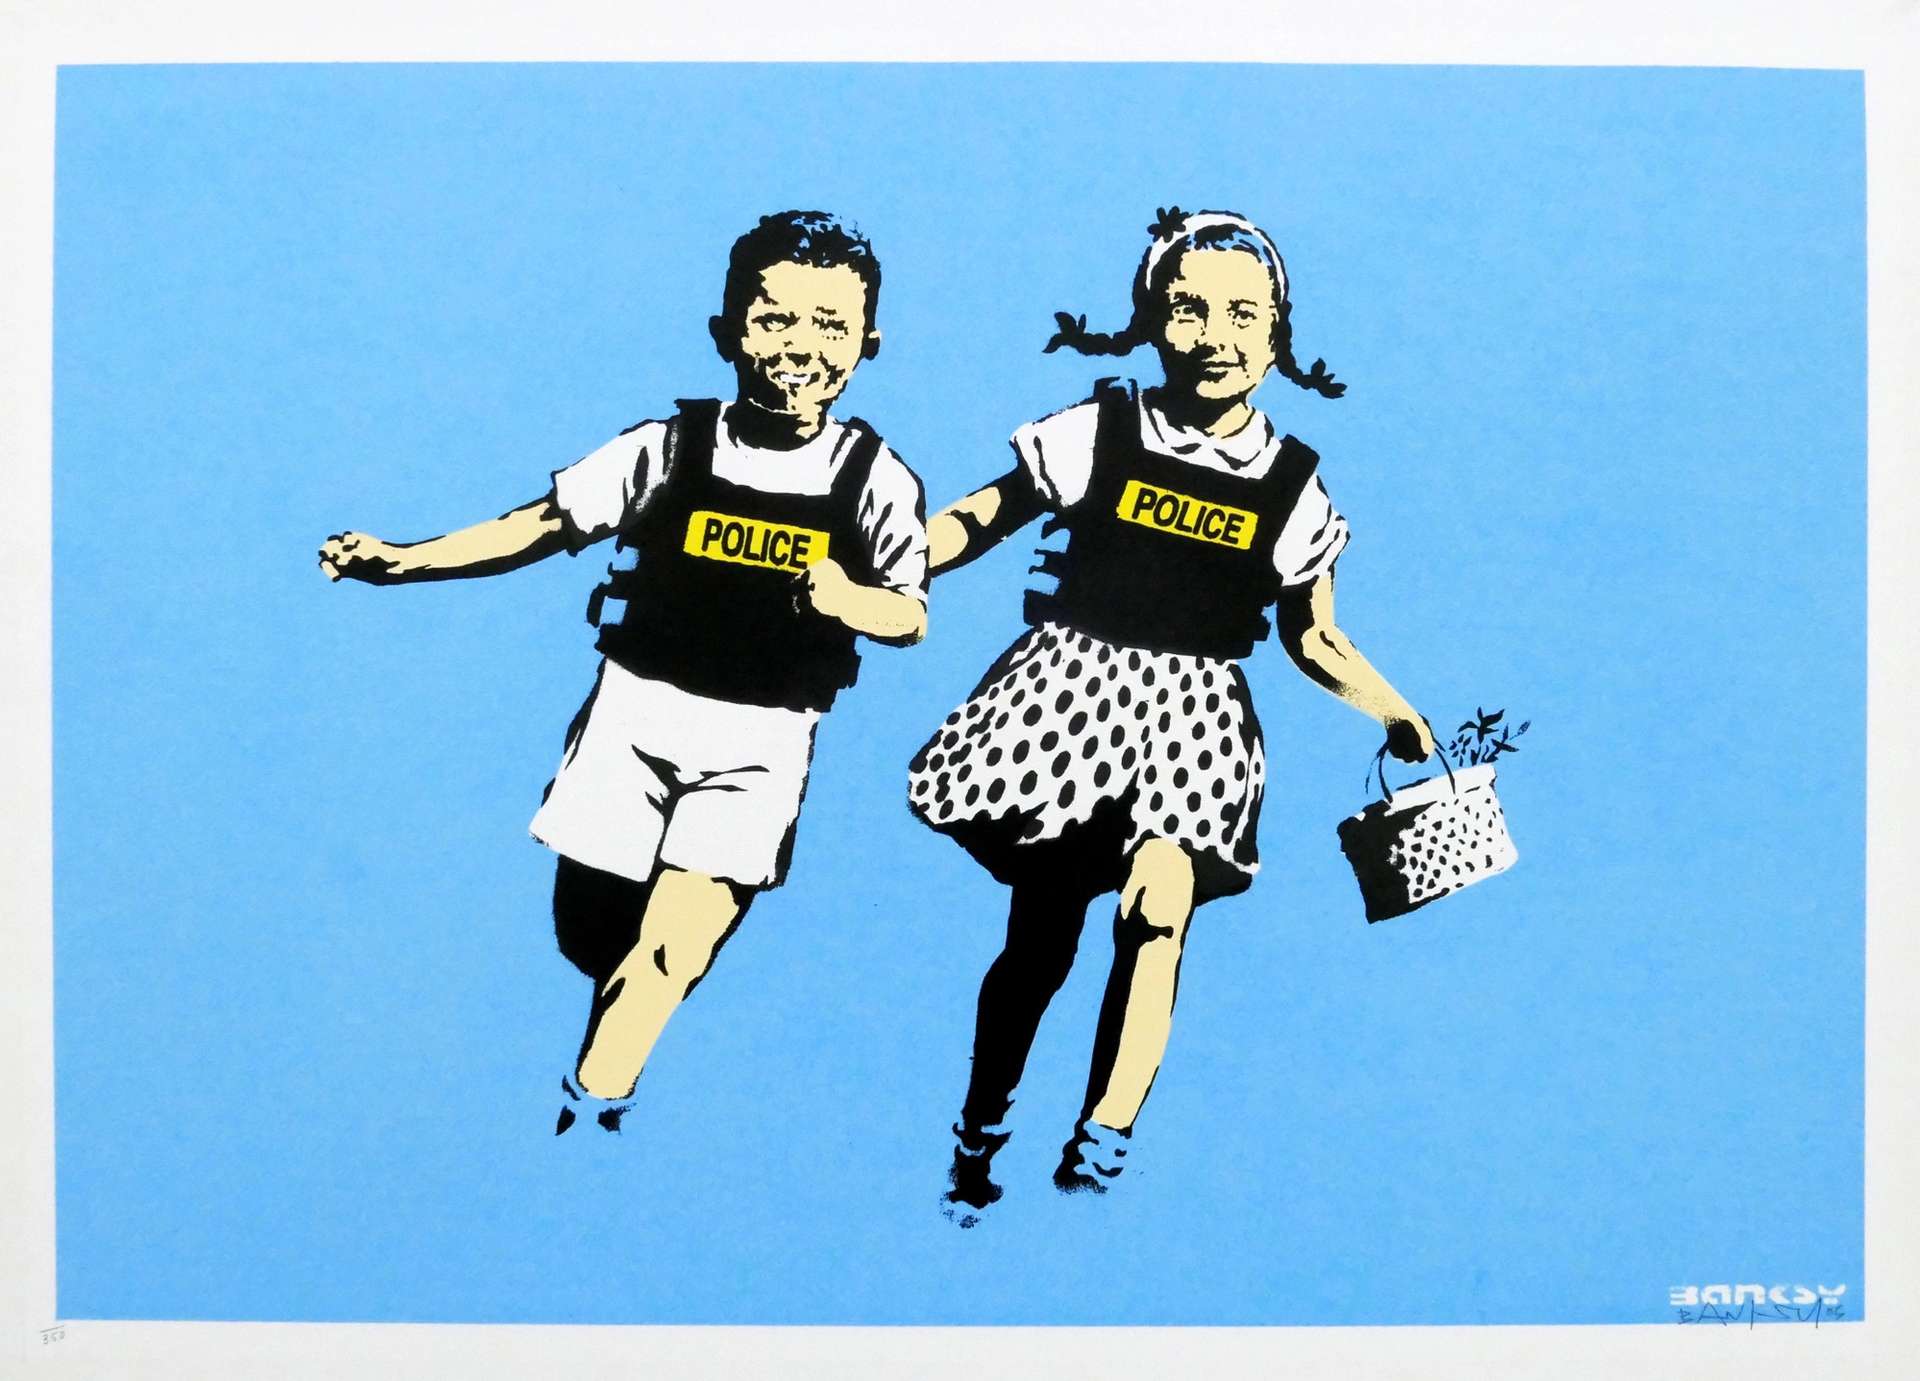 An image of the print Jack & Jill by the artist Banksy. The artwork depicts two children, depicted in a spray-painted style, running together while wearing police vests. The children are monochrome against a bright blue background.